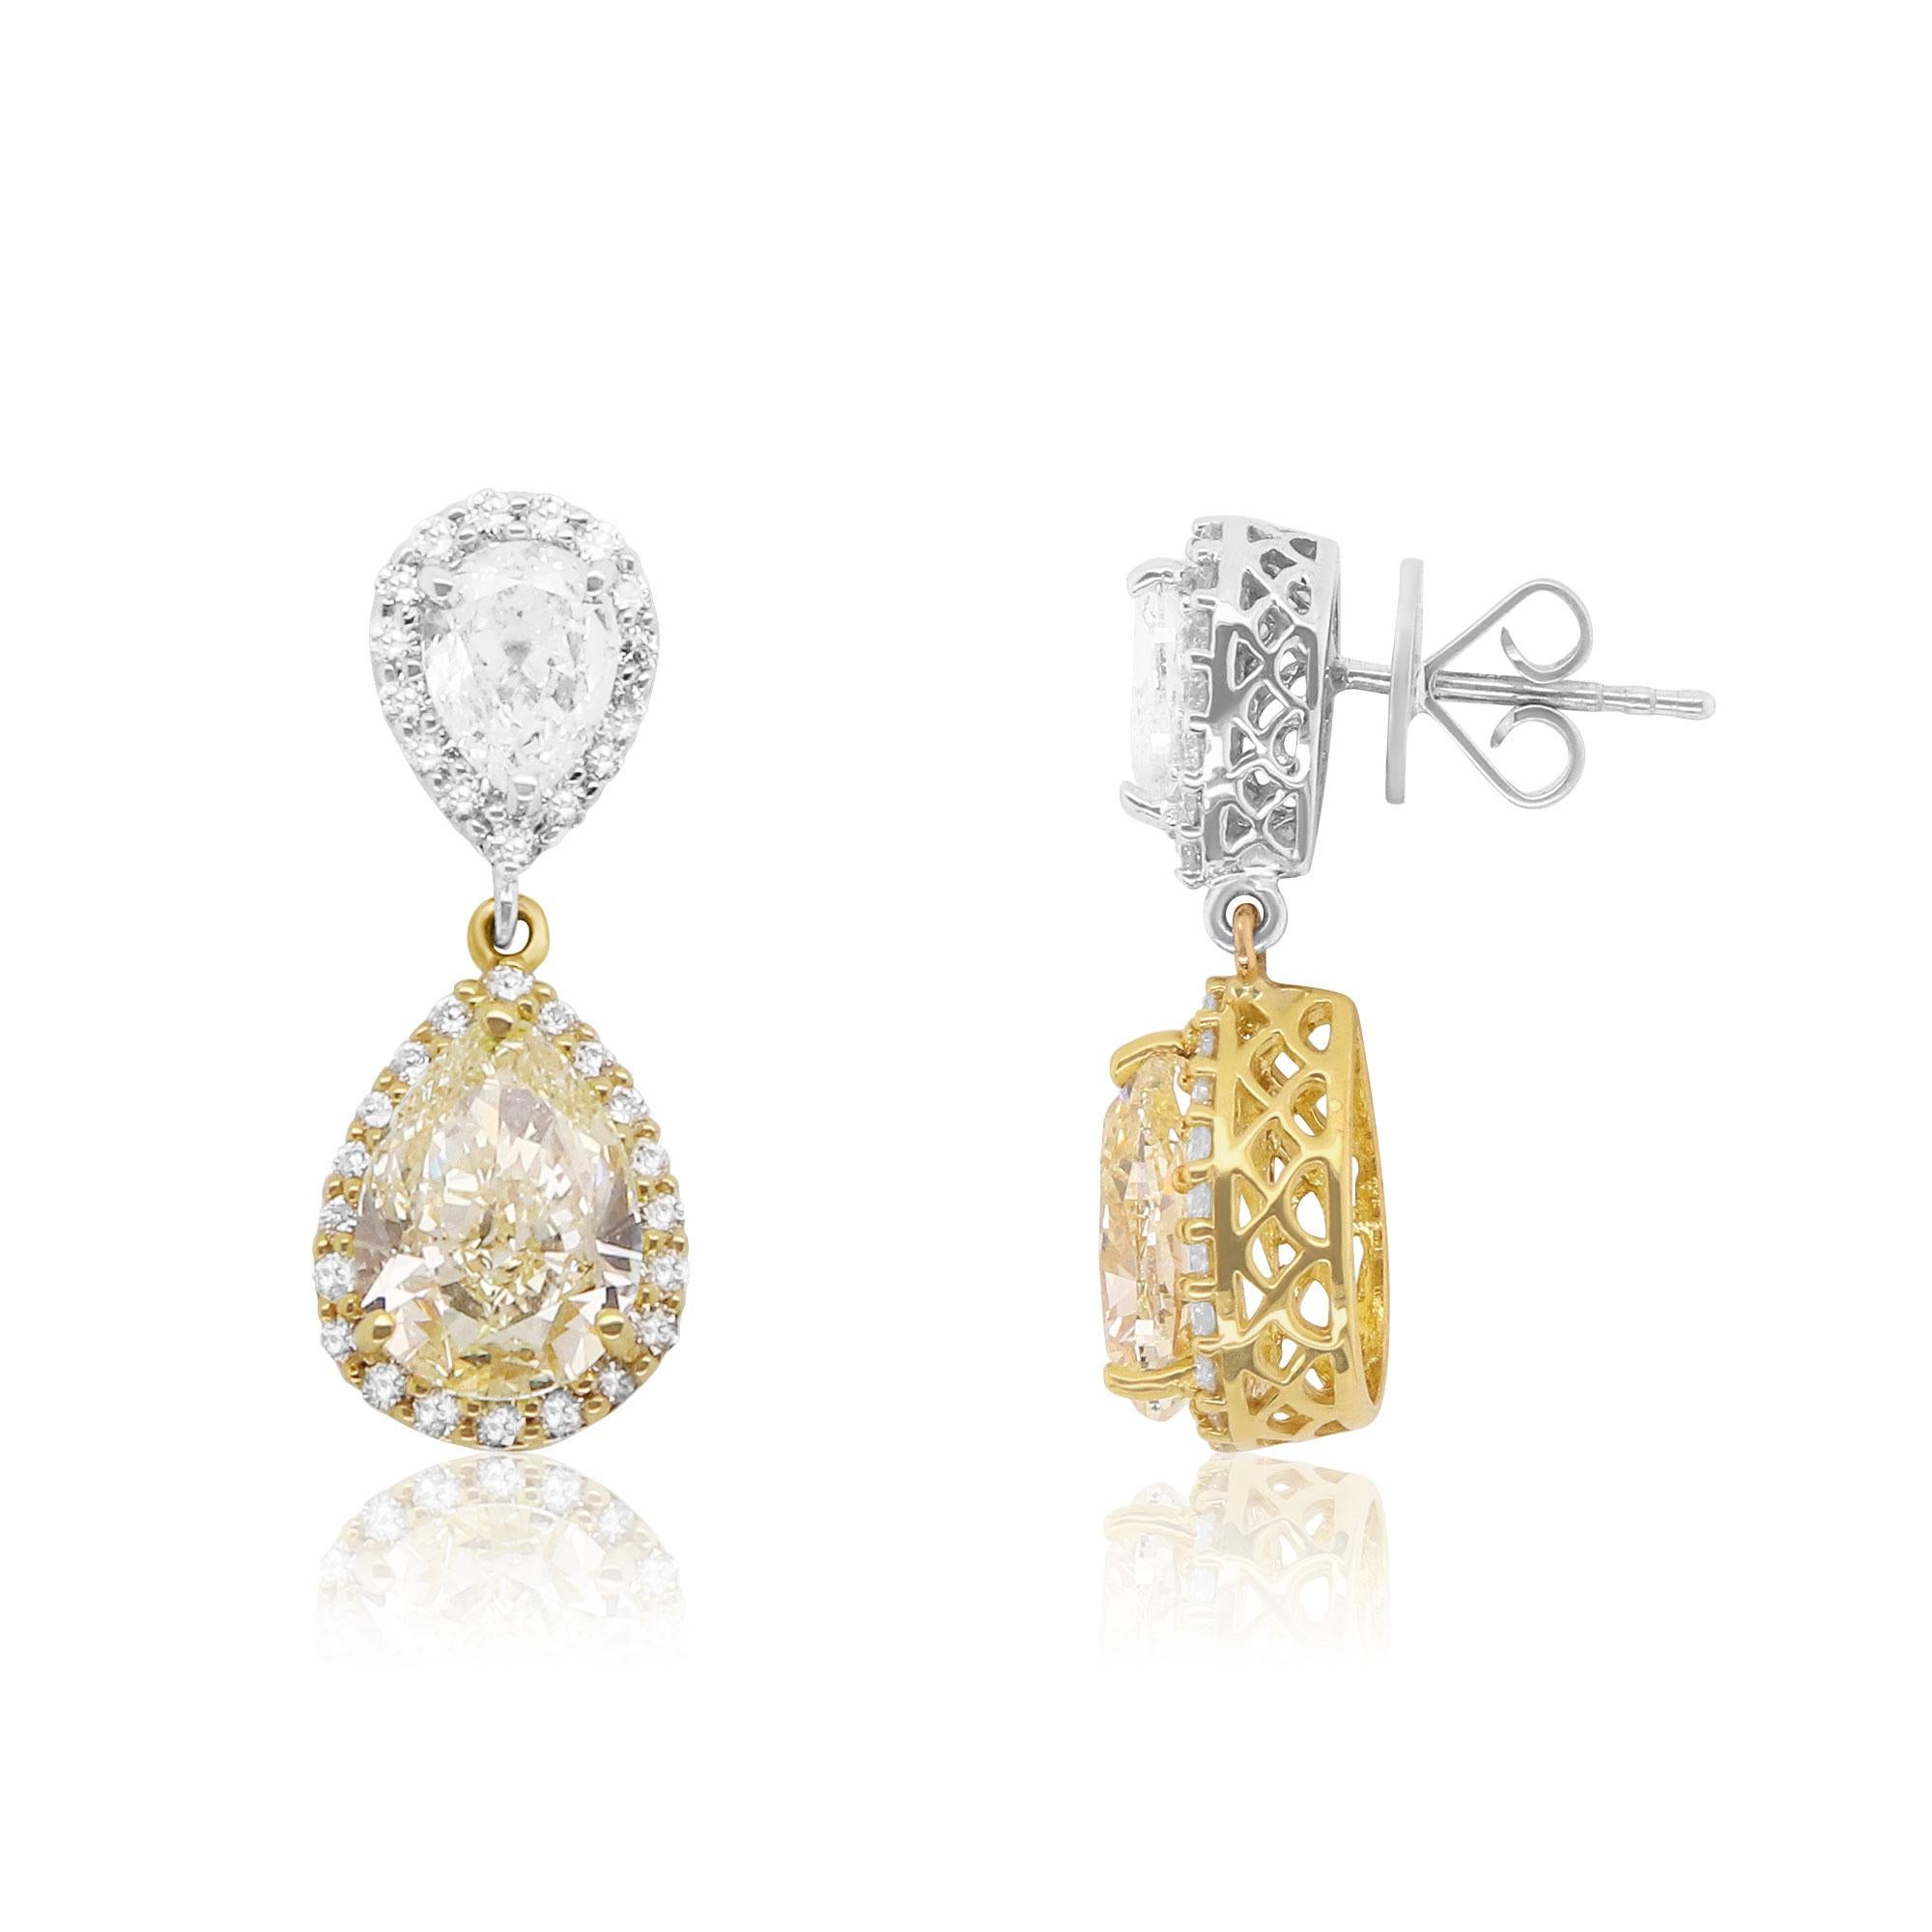 Material: 18K Two-Tone Gold
Center Stones:  2 Pear Shaped Yellow Diamonds at 4.52 Carats. Clarity/ VS-1
Both Yellow Diamonds are GIA Certified. Please see the photos for certificates.

White Diamond Details: 2 Pear Shaped White Diamonds at 1.24